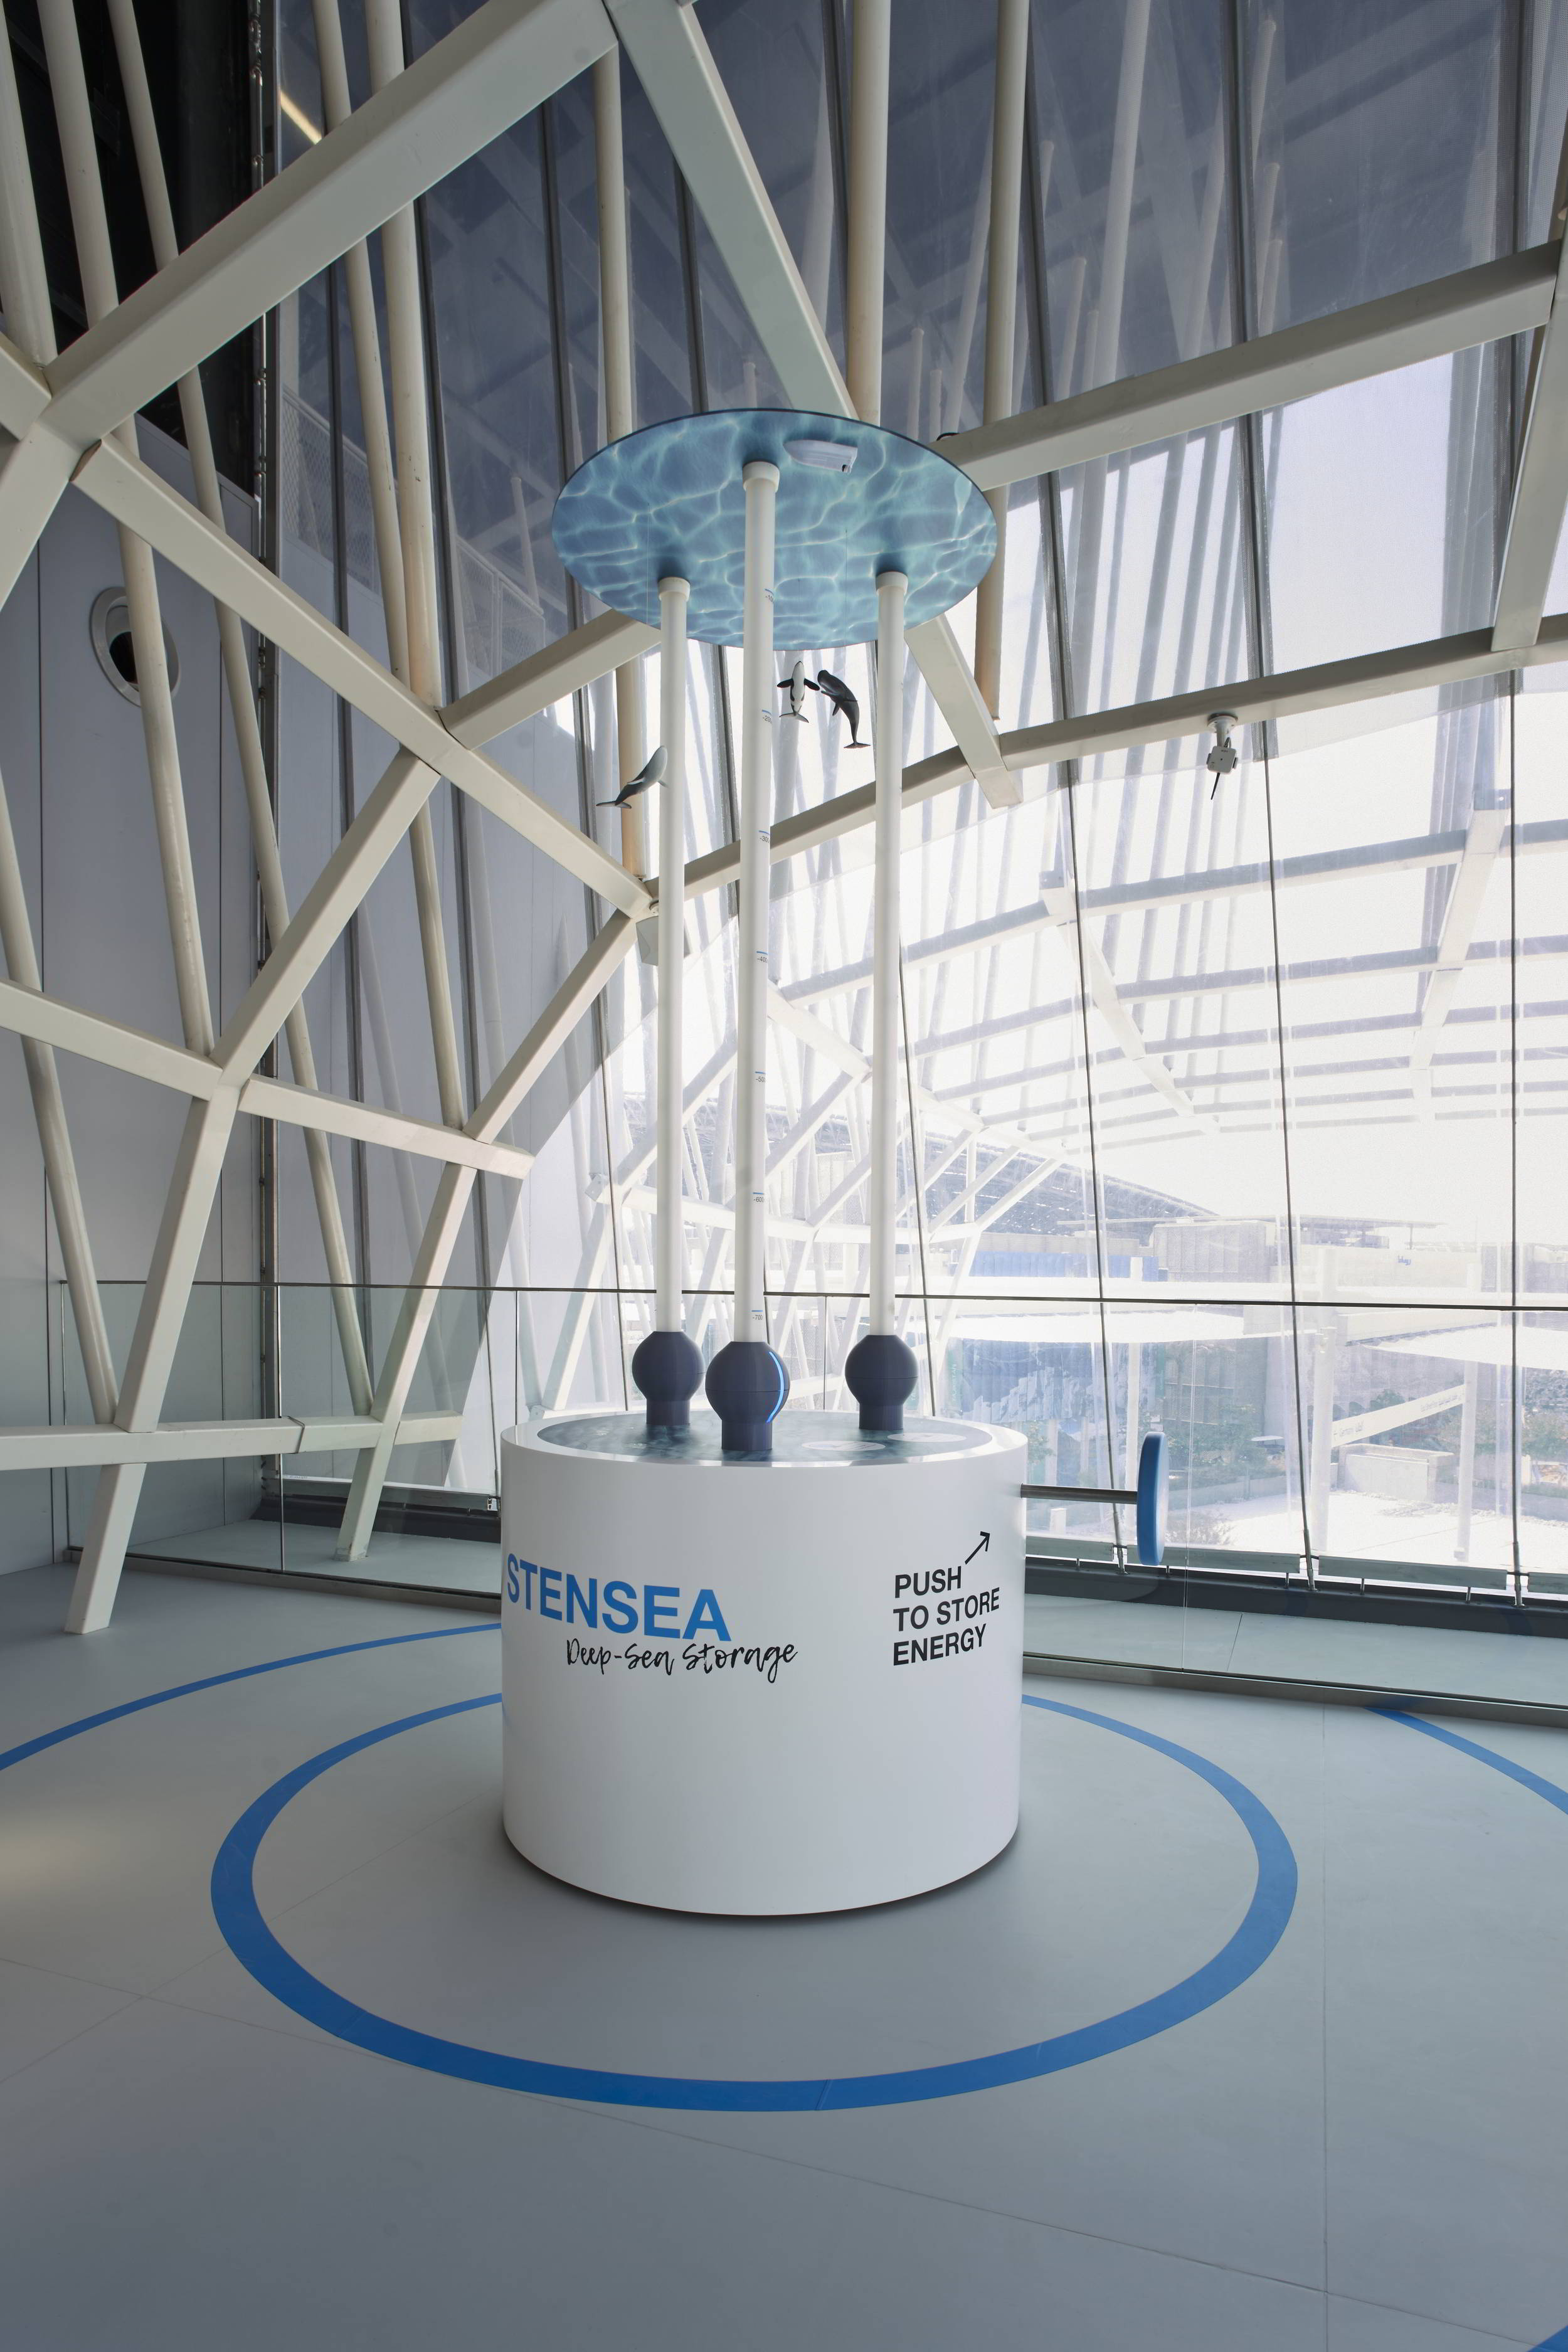 3D miniatures of the StEnSea facilities as an exhibit at Expo 2020 in Dubai.